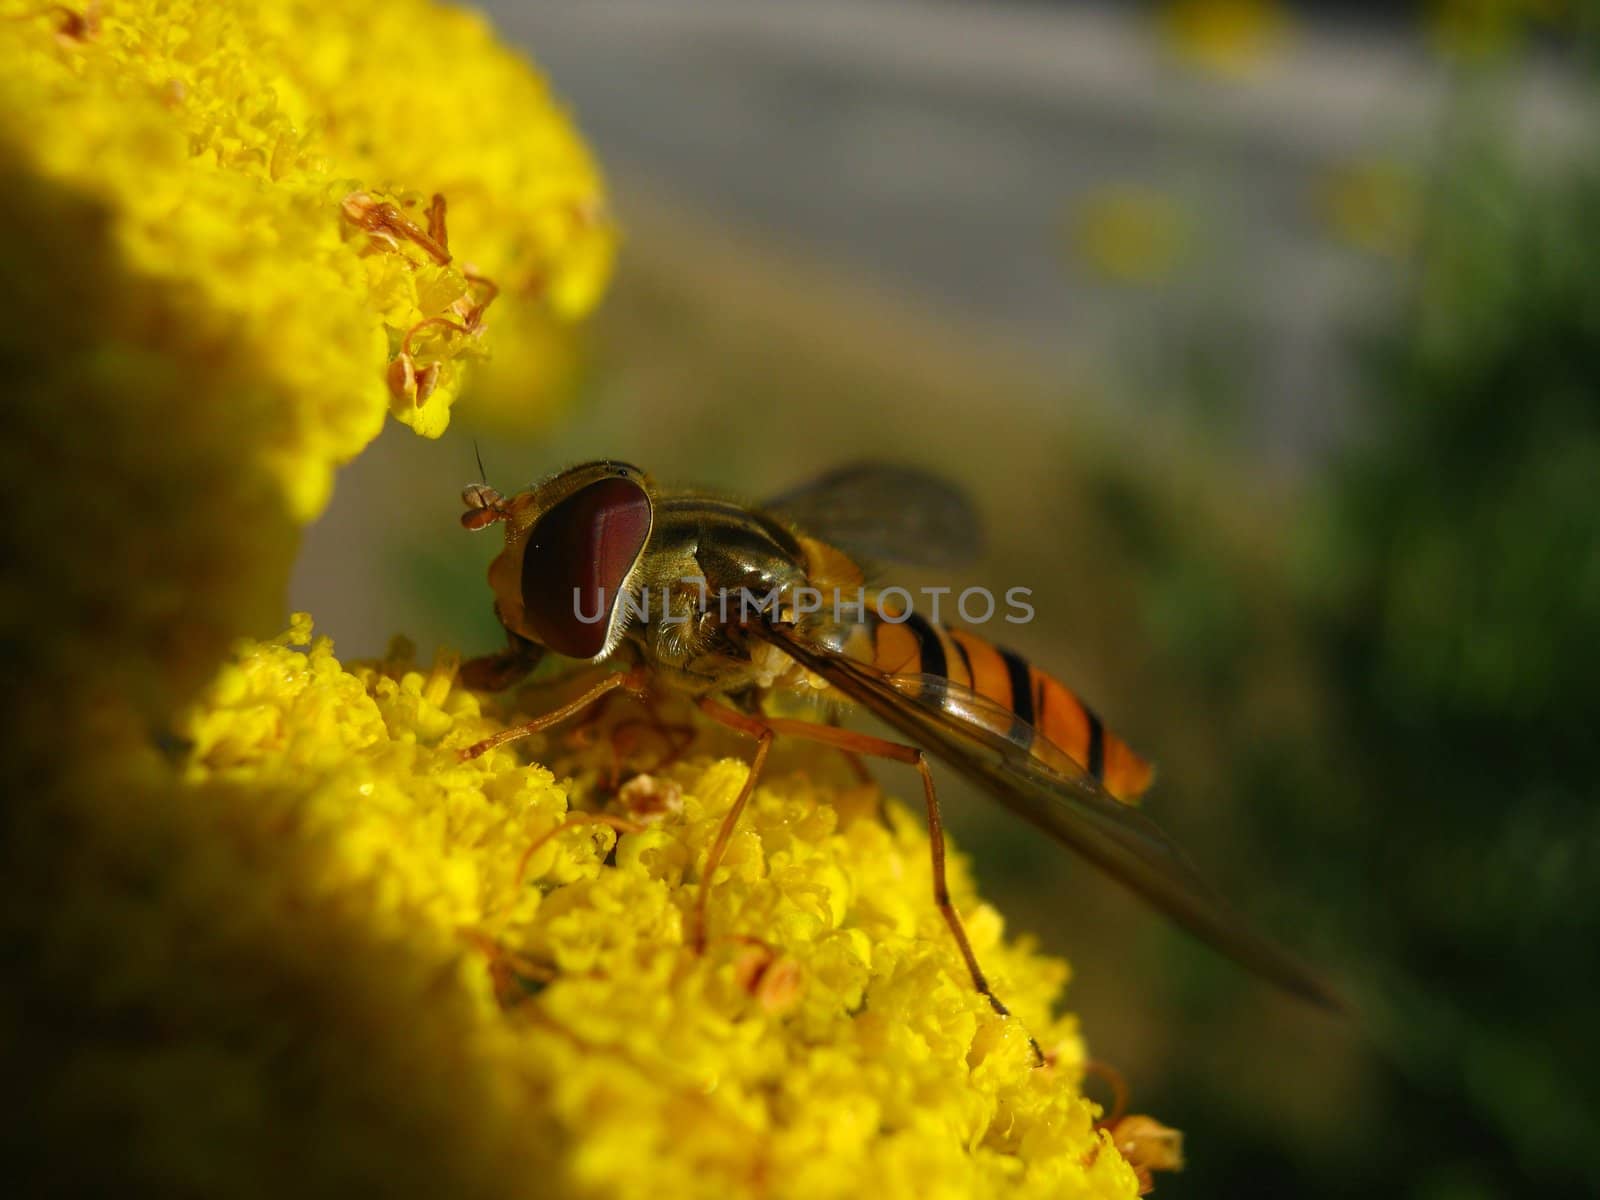 Hover fly by silencefoto